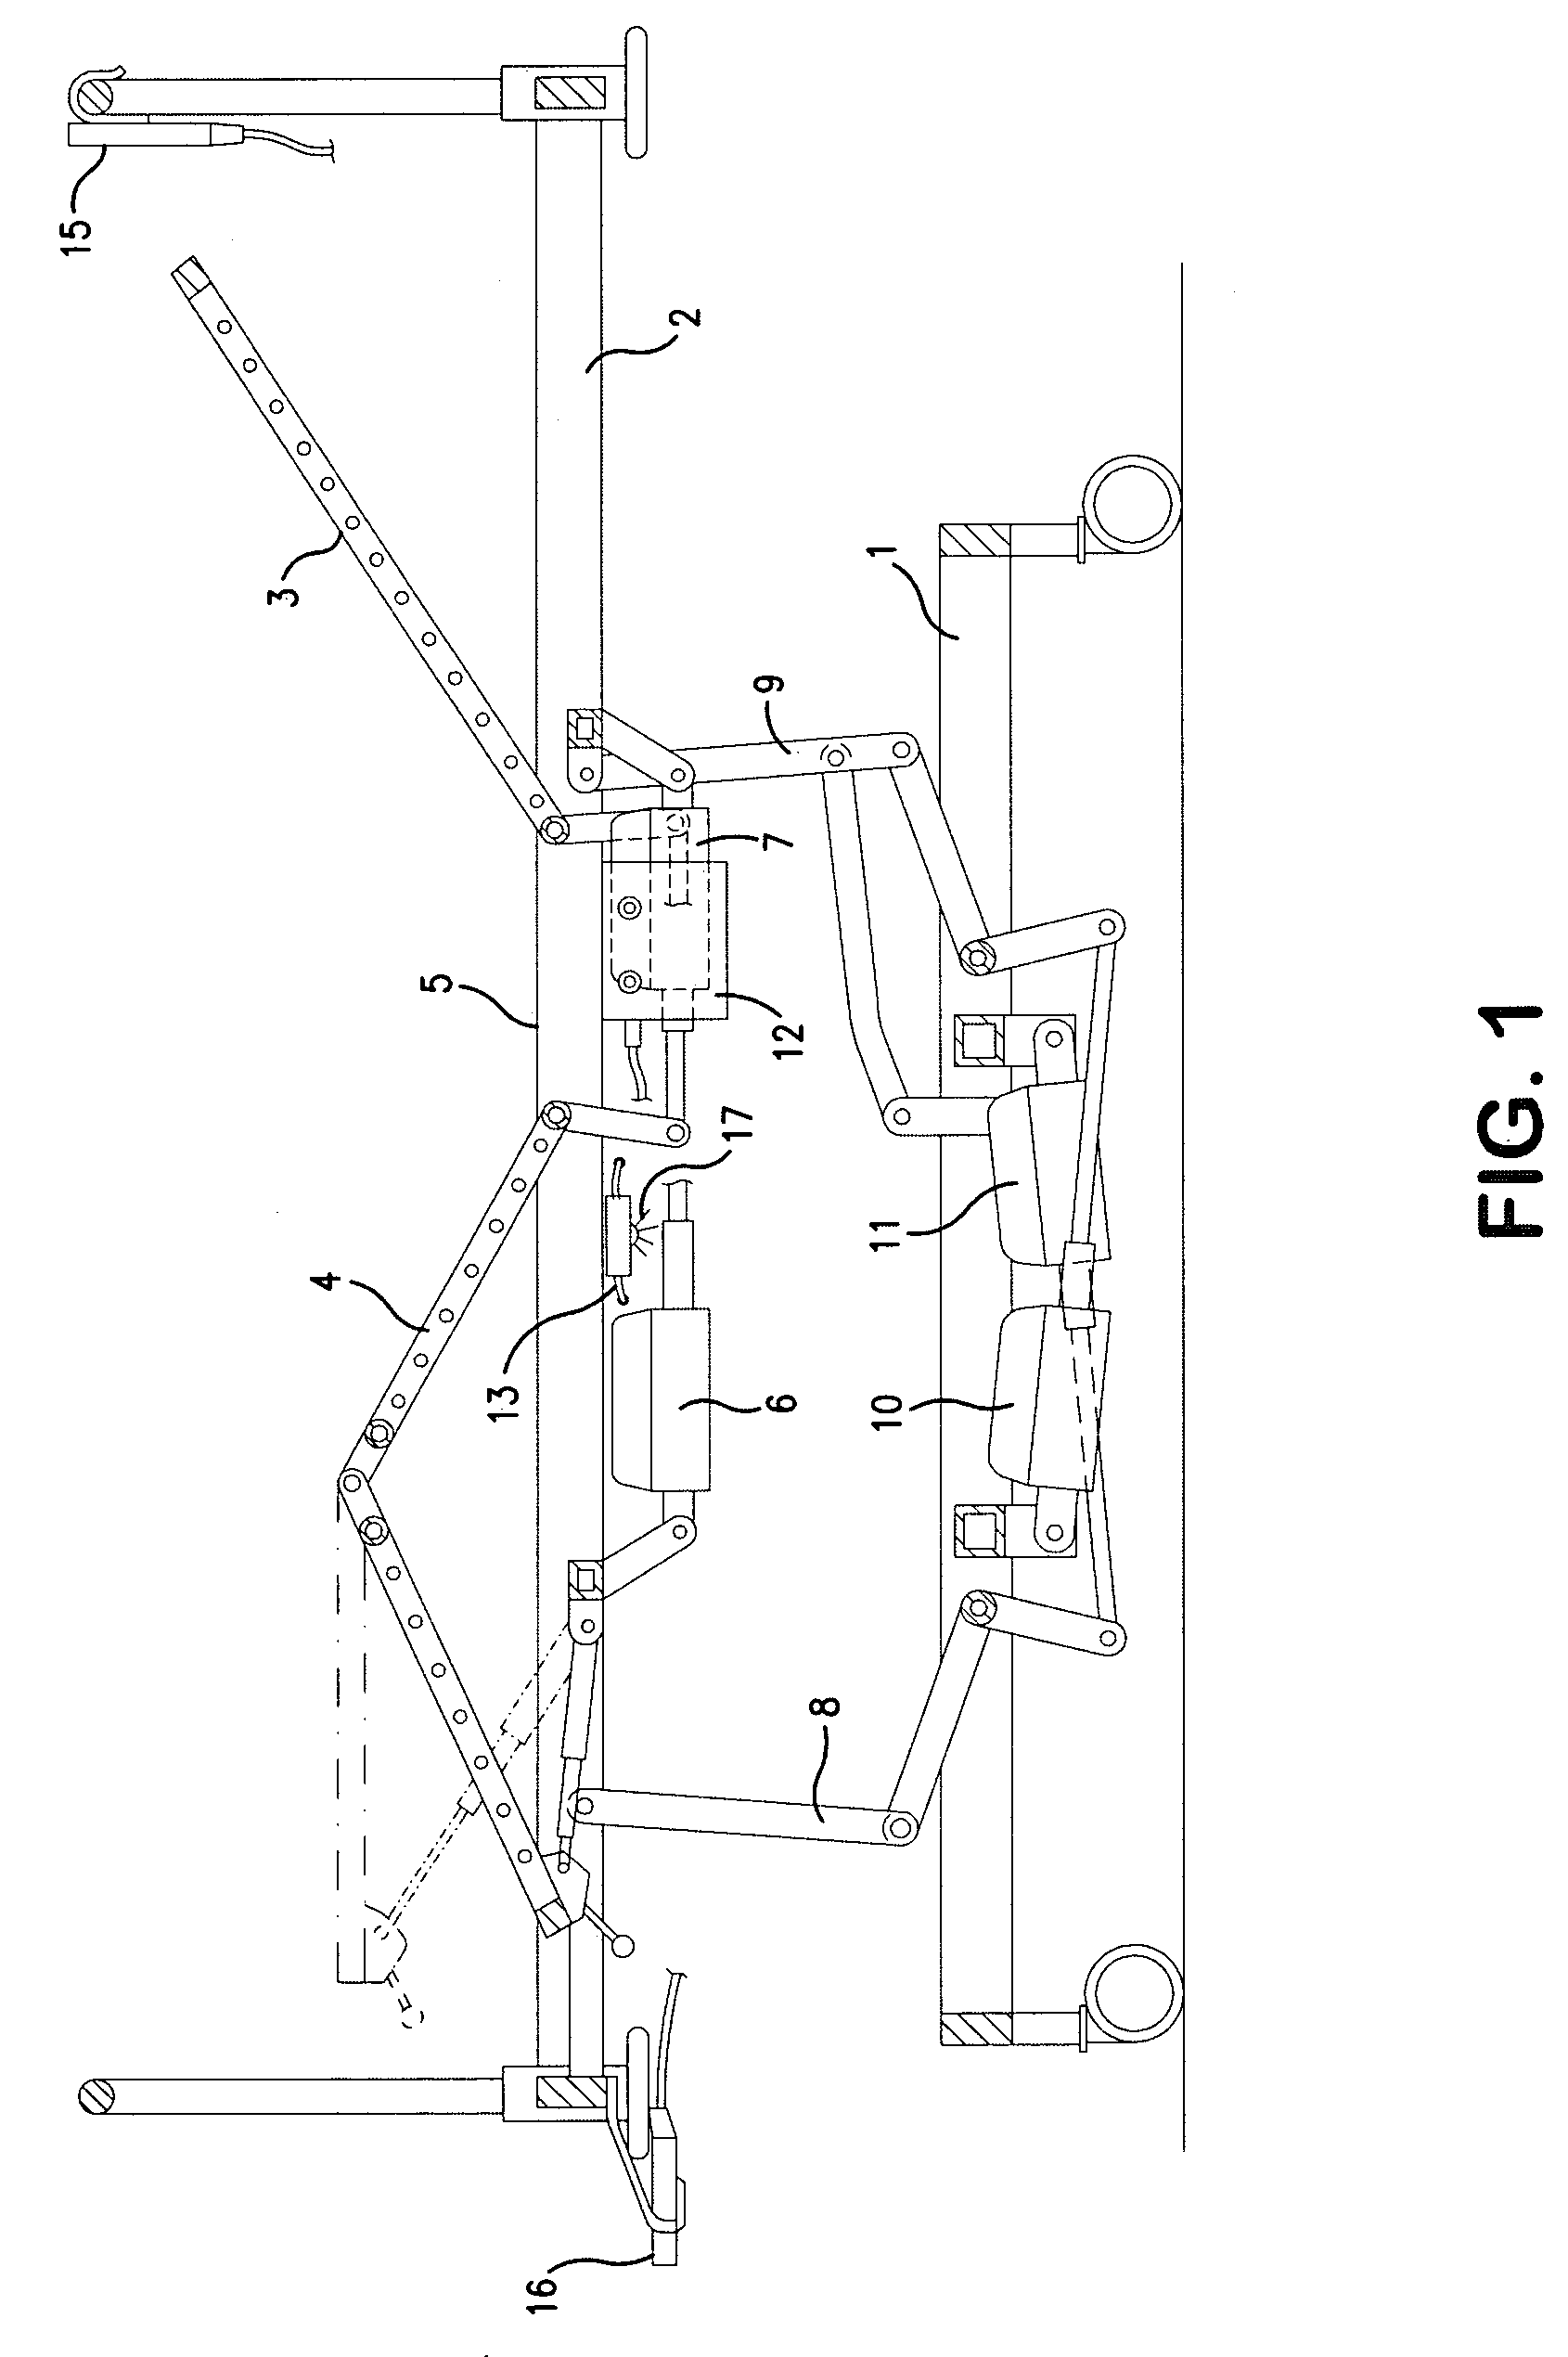 Electrical actuator system for articles of furniture